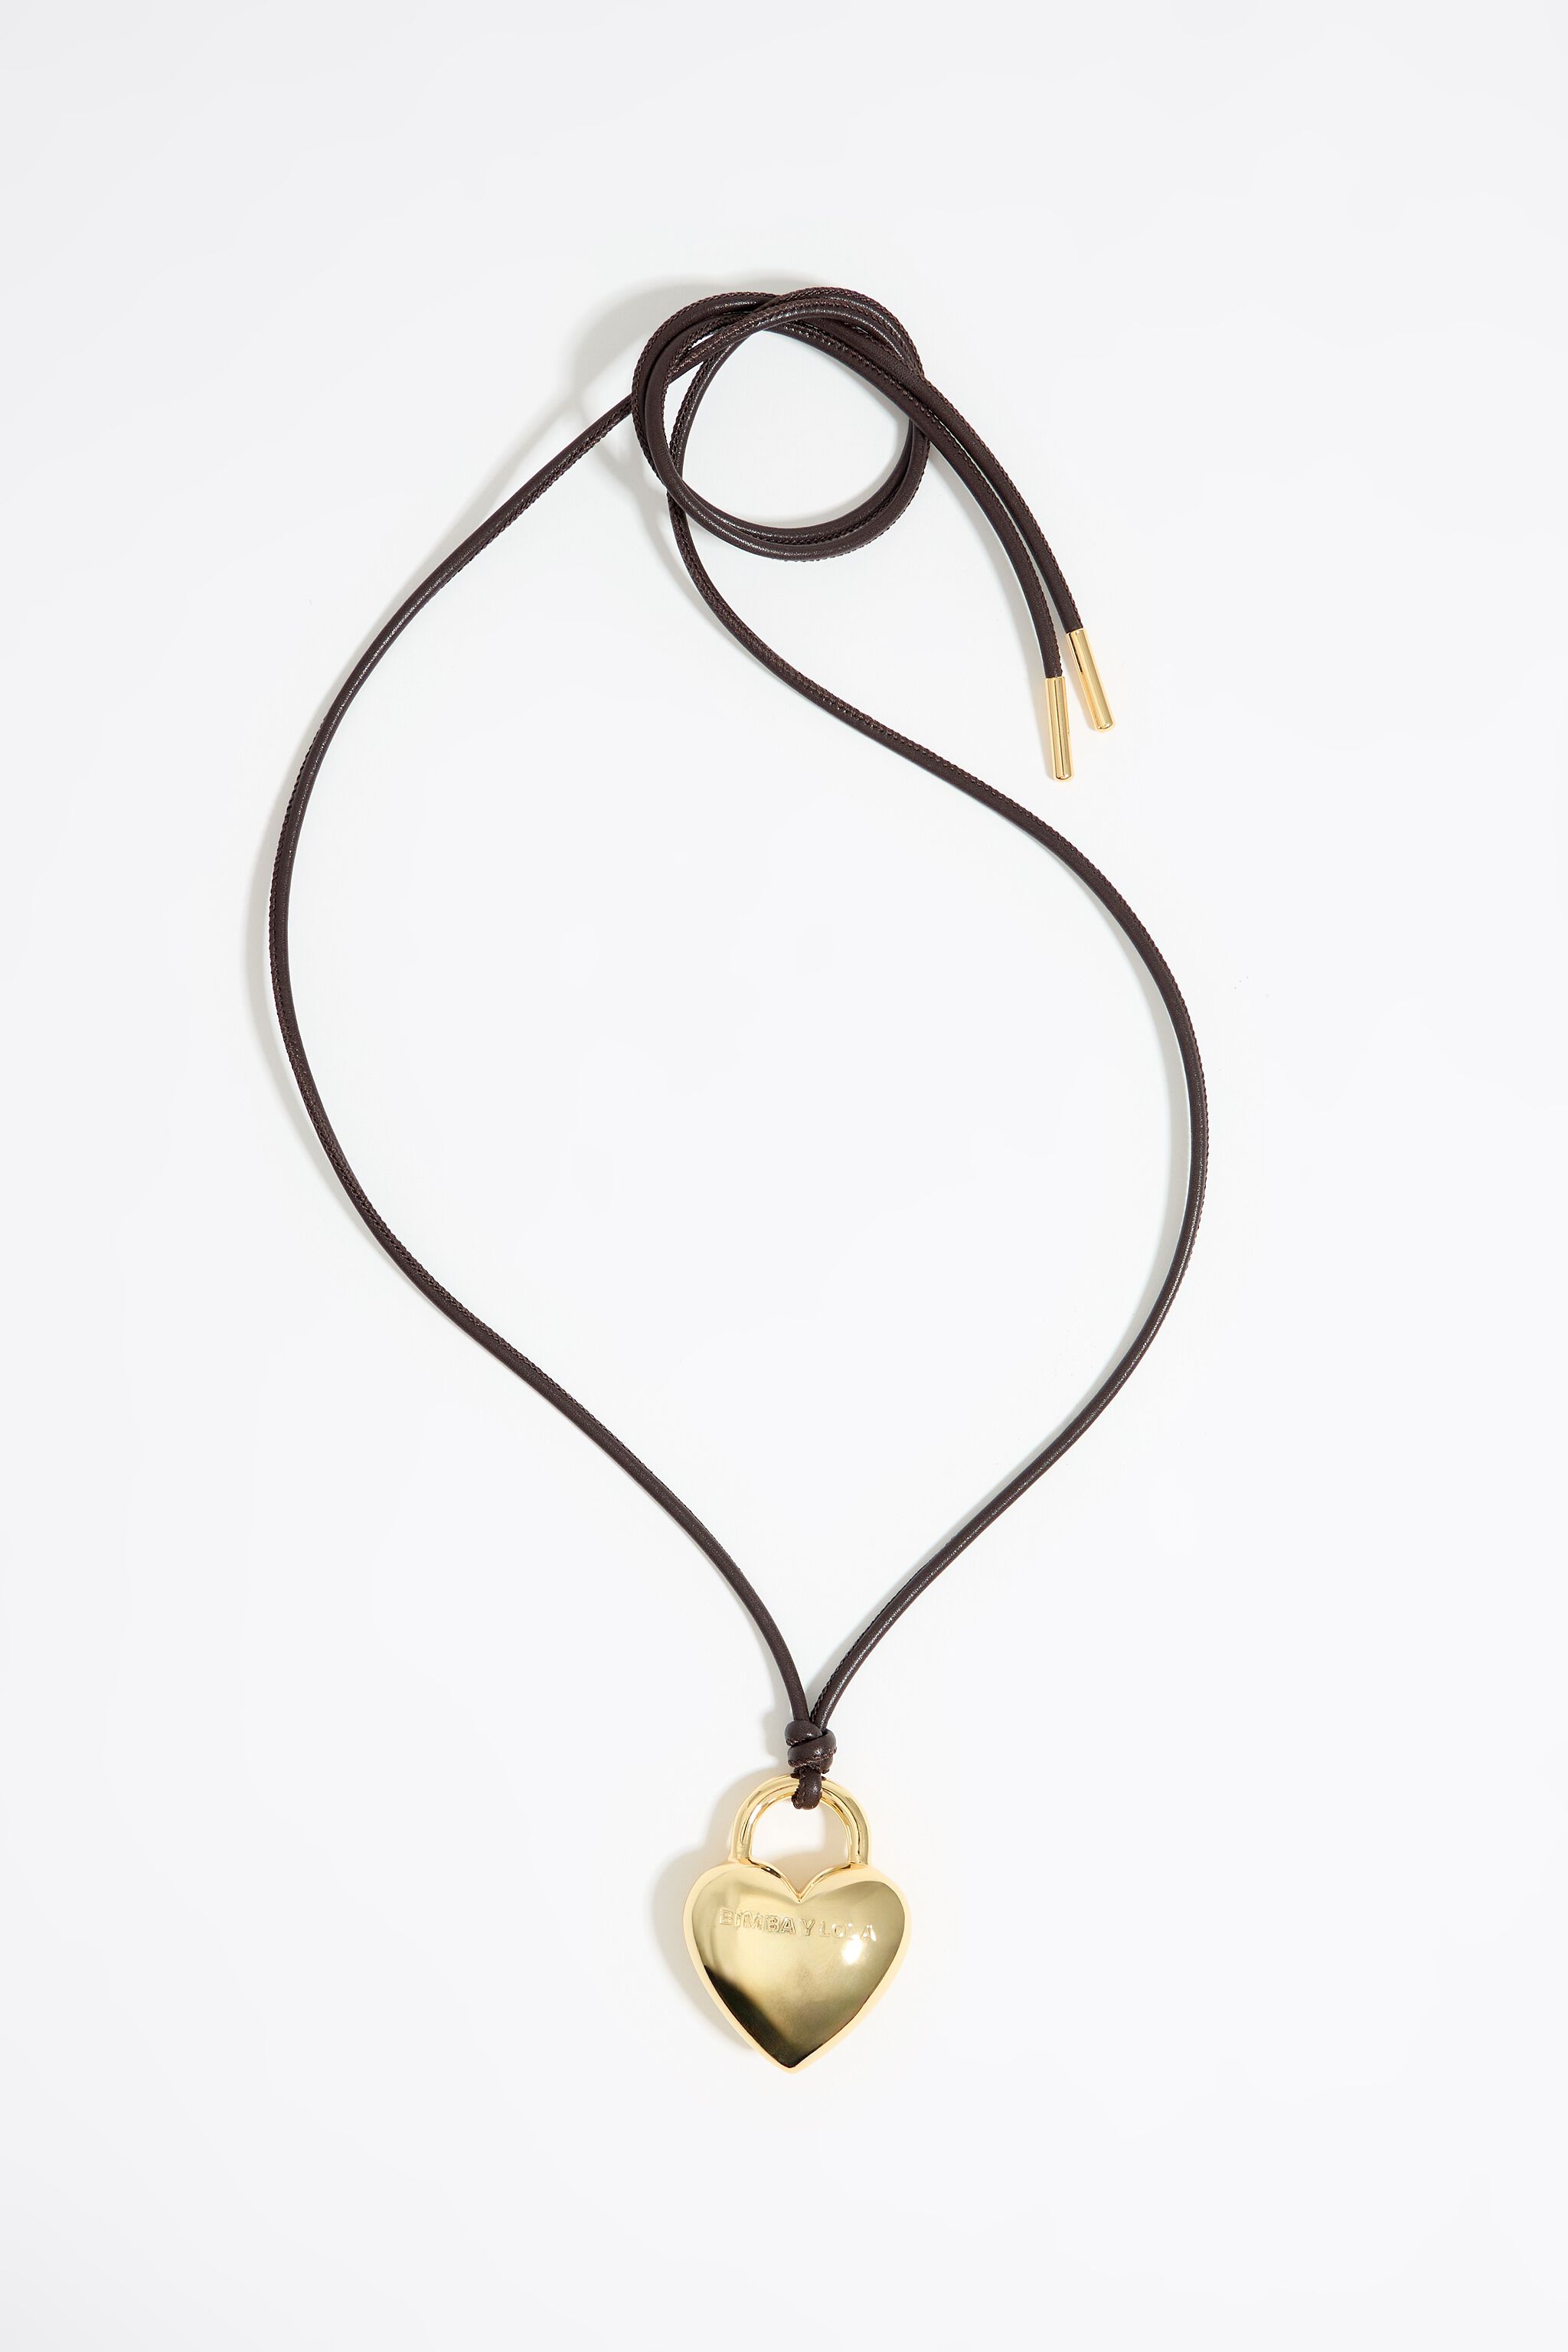 Gold heart leather cord necklace